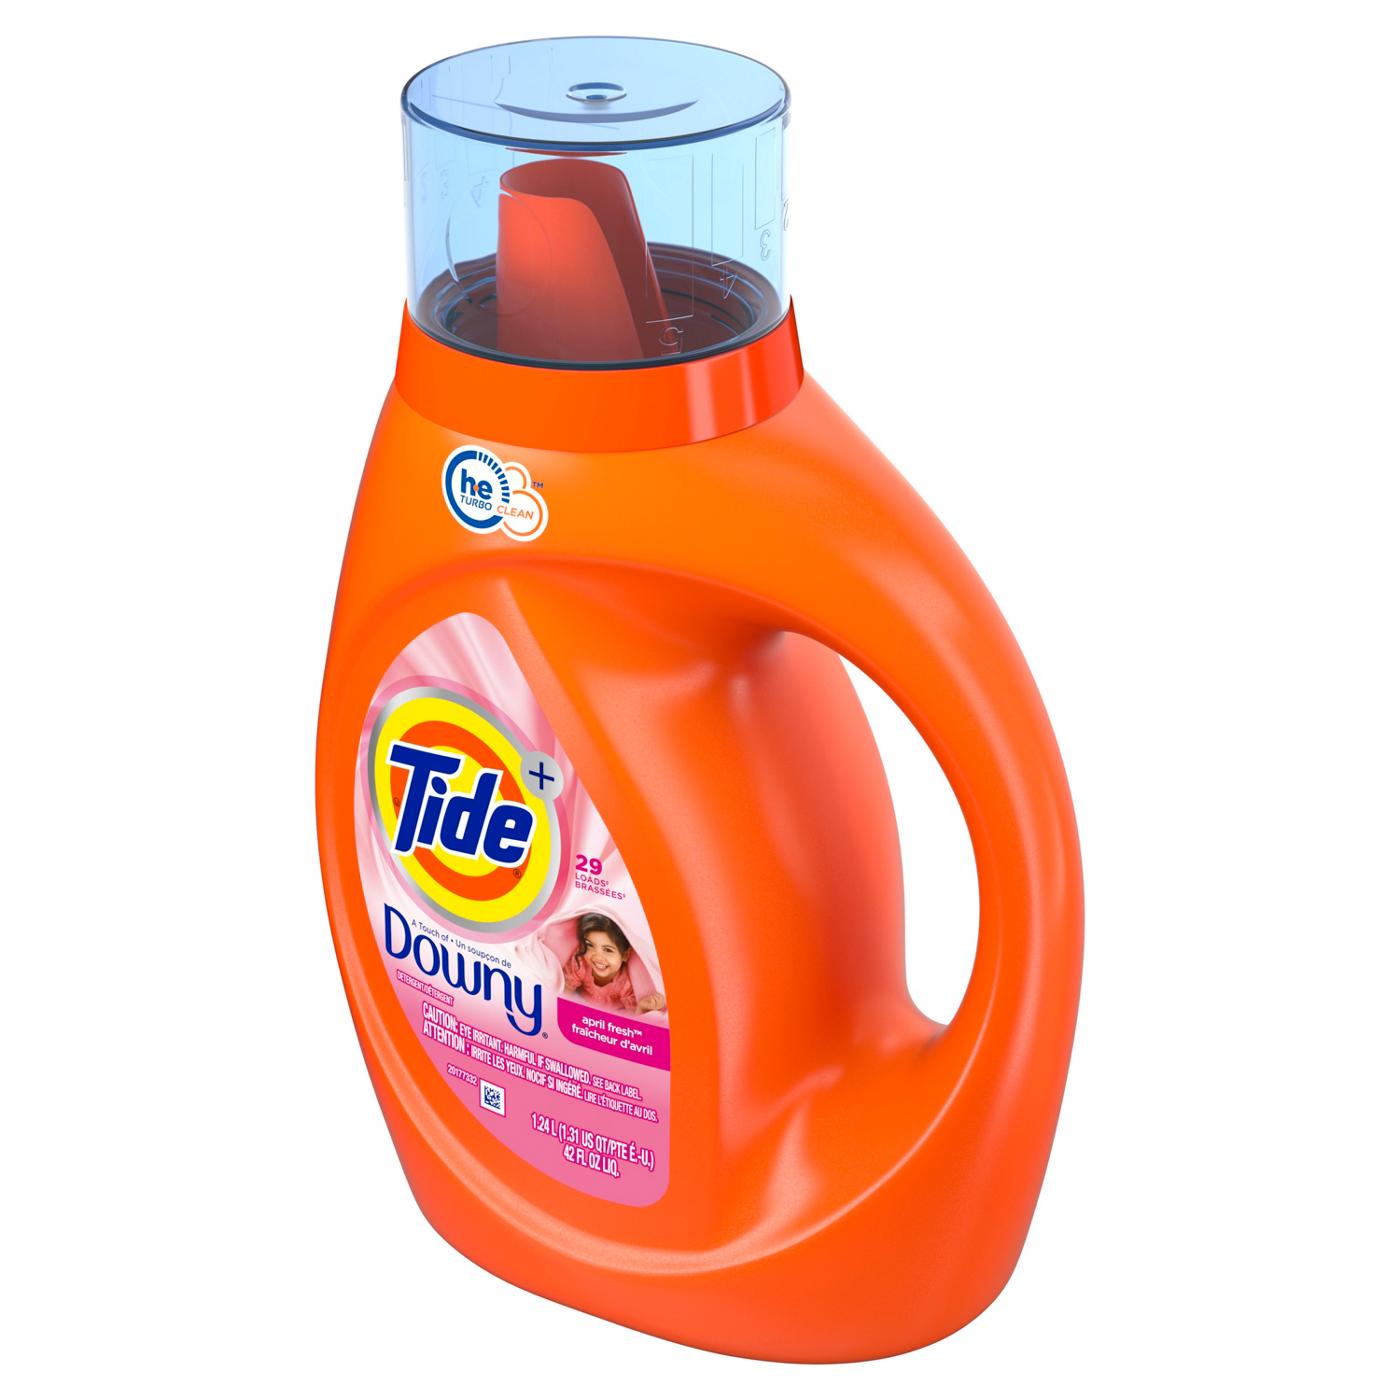 Tide + Downy HE Turbo Clean Liquid Laundry Detergent, 29 Loads - April Fresh; image 5 of 12